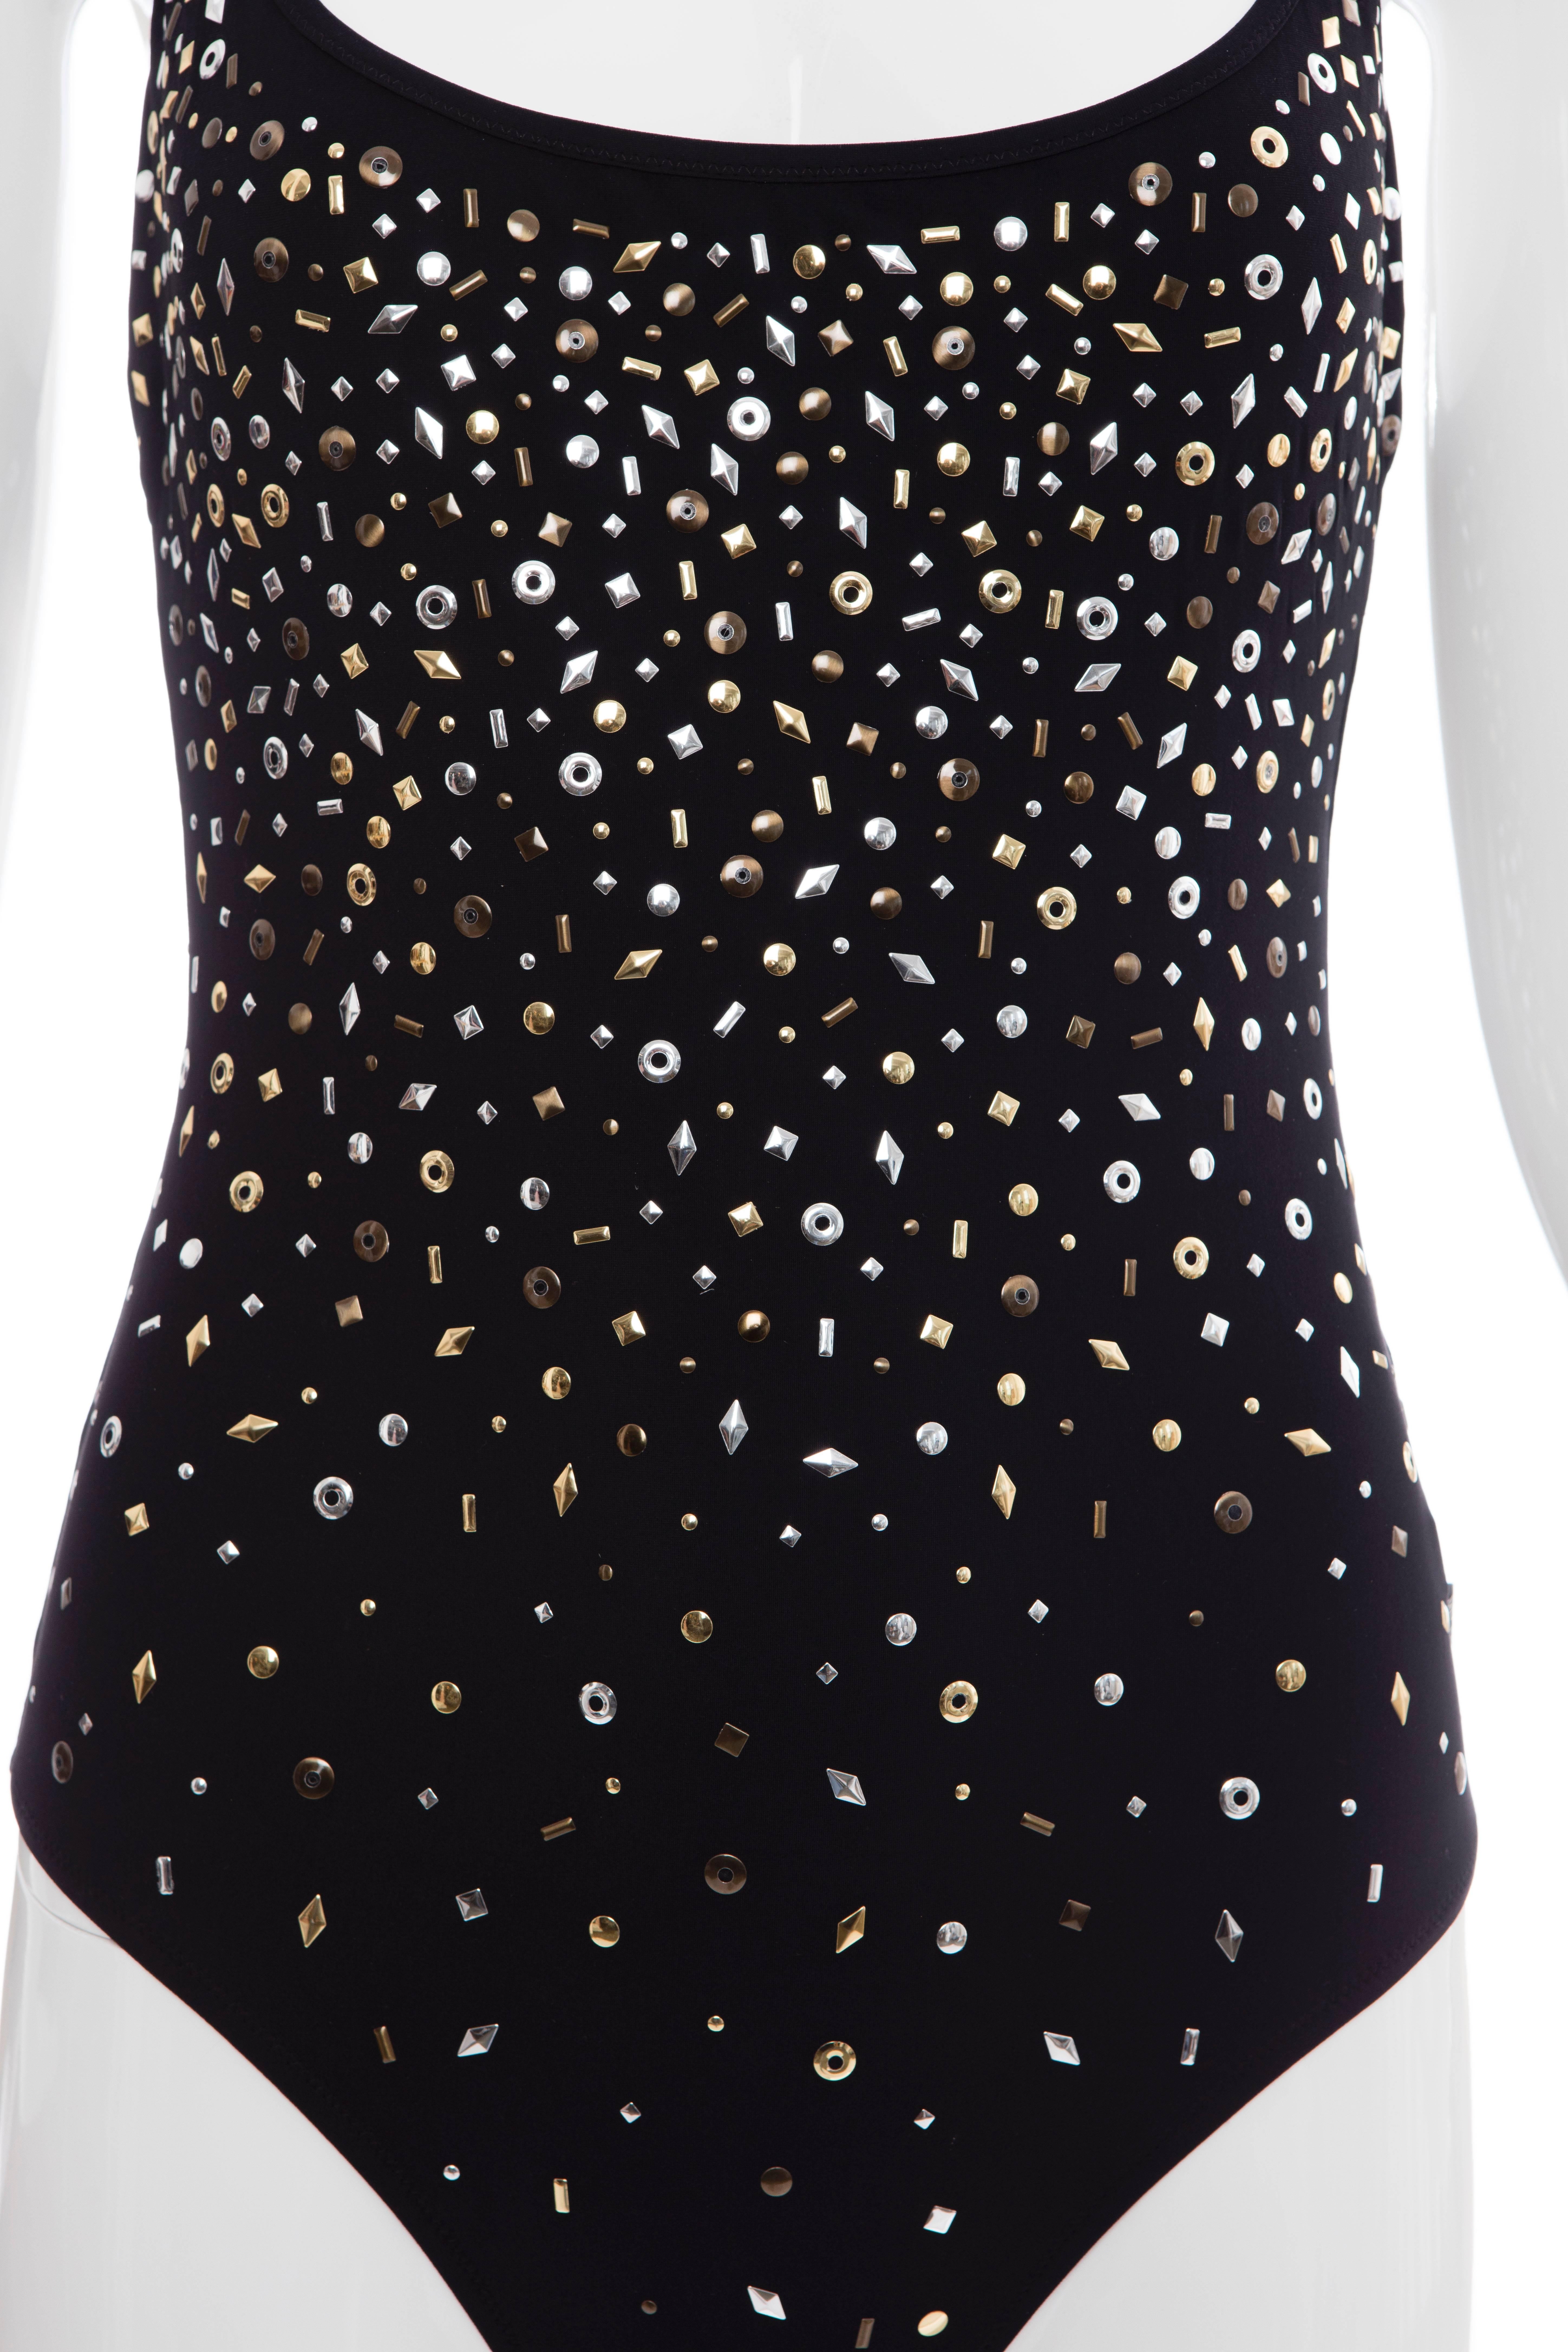 Moschino Black Nylon Spandex Bodysuit With Gold And Silver Embellishments In New Condition For Sale In Cincinnati, OH